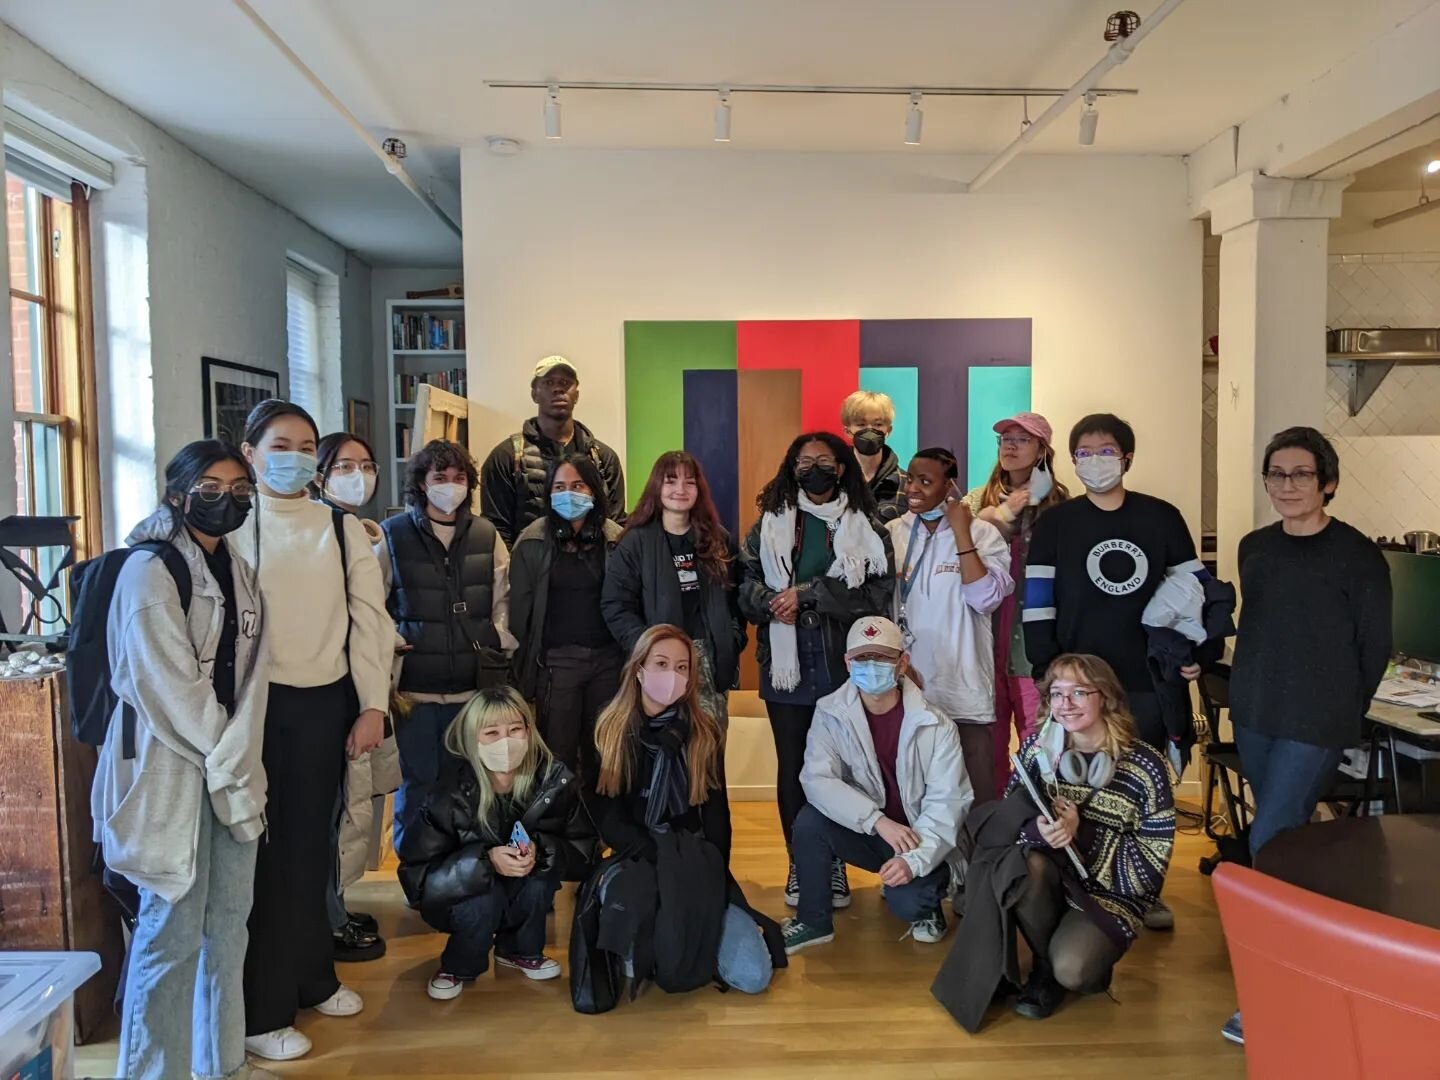 A big thanks to @kimuchiyama for inviting my @prattfoundation Light, Color and Design Lab class to visit her studio. We experienced seeing her paintings first hand after studying them in class. A dream come true!

See more of her work: 499 Park Ave T